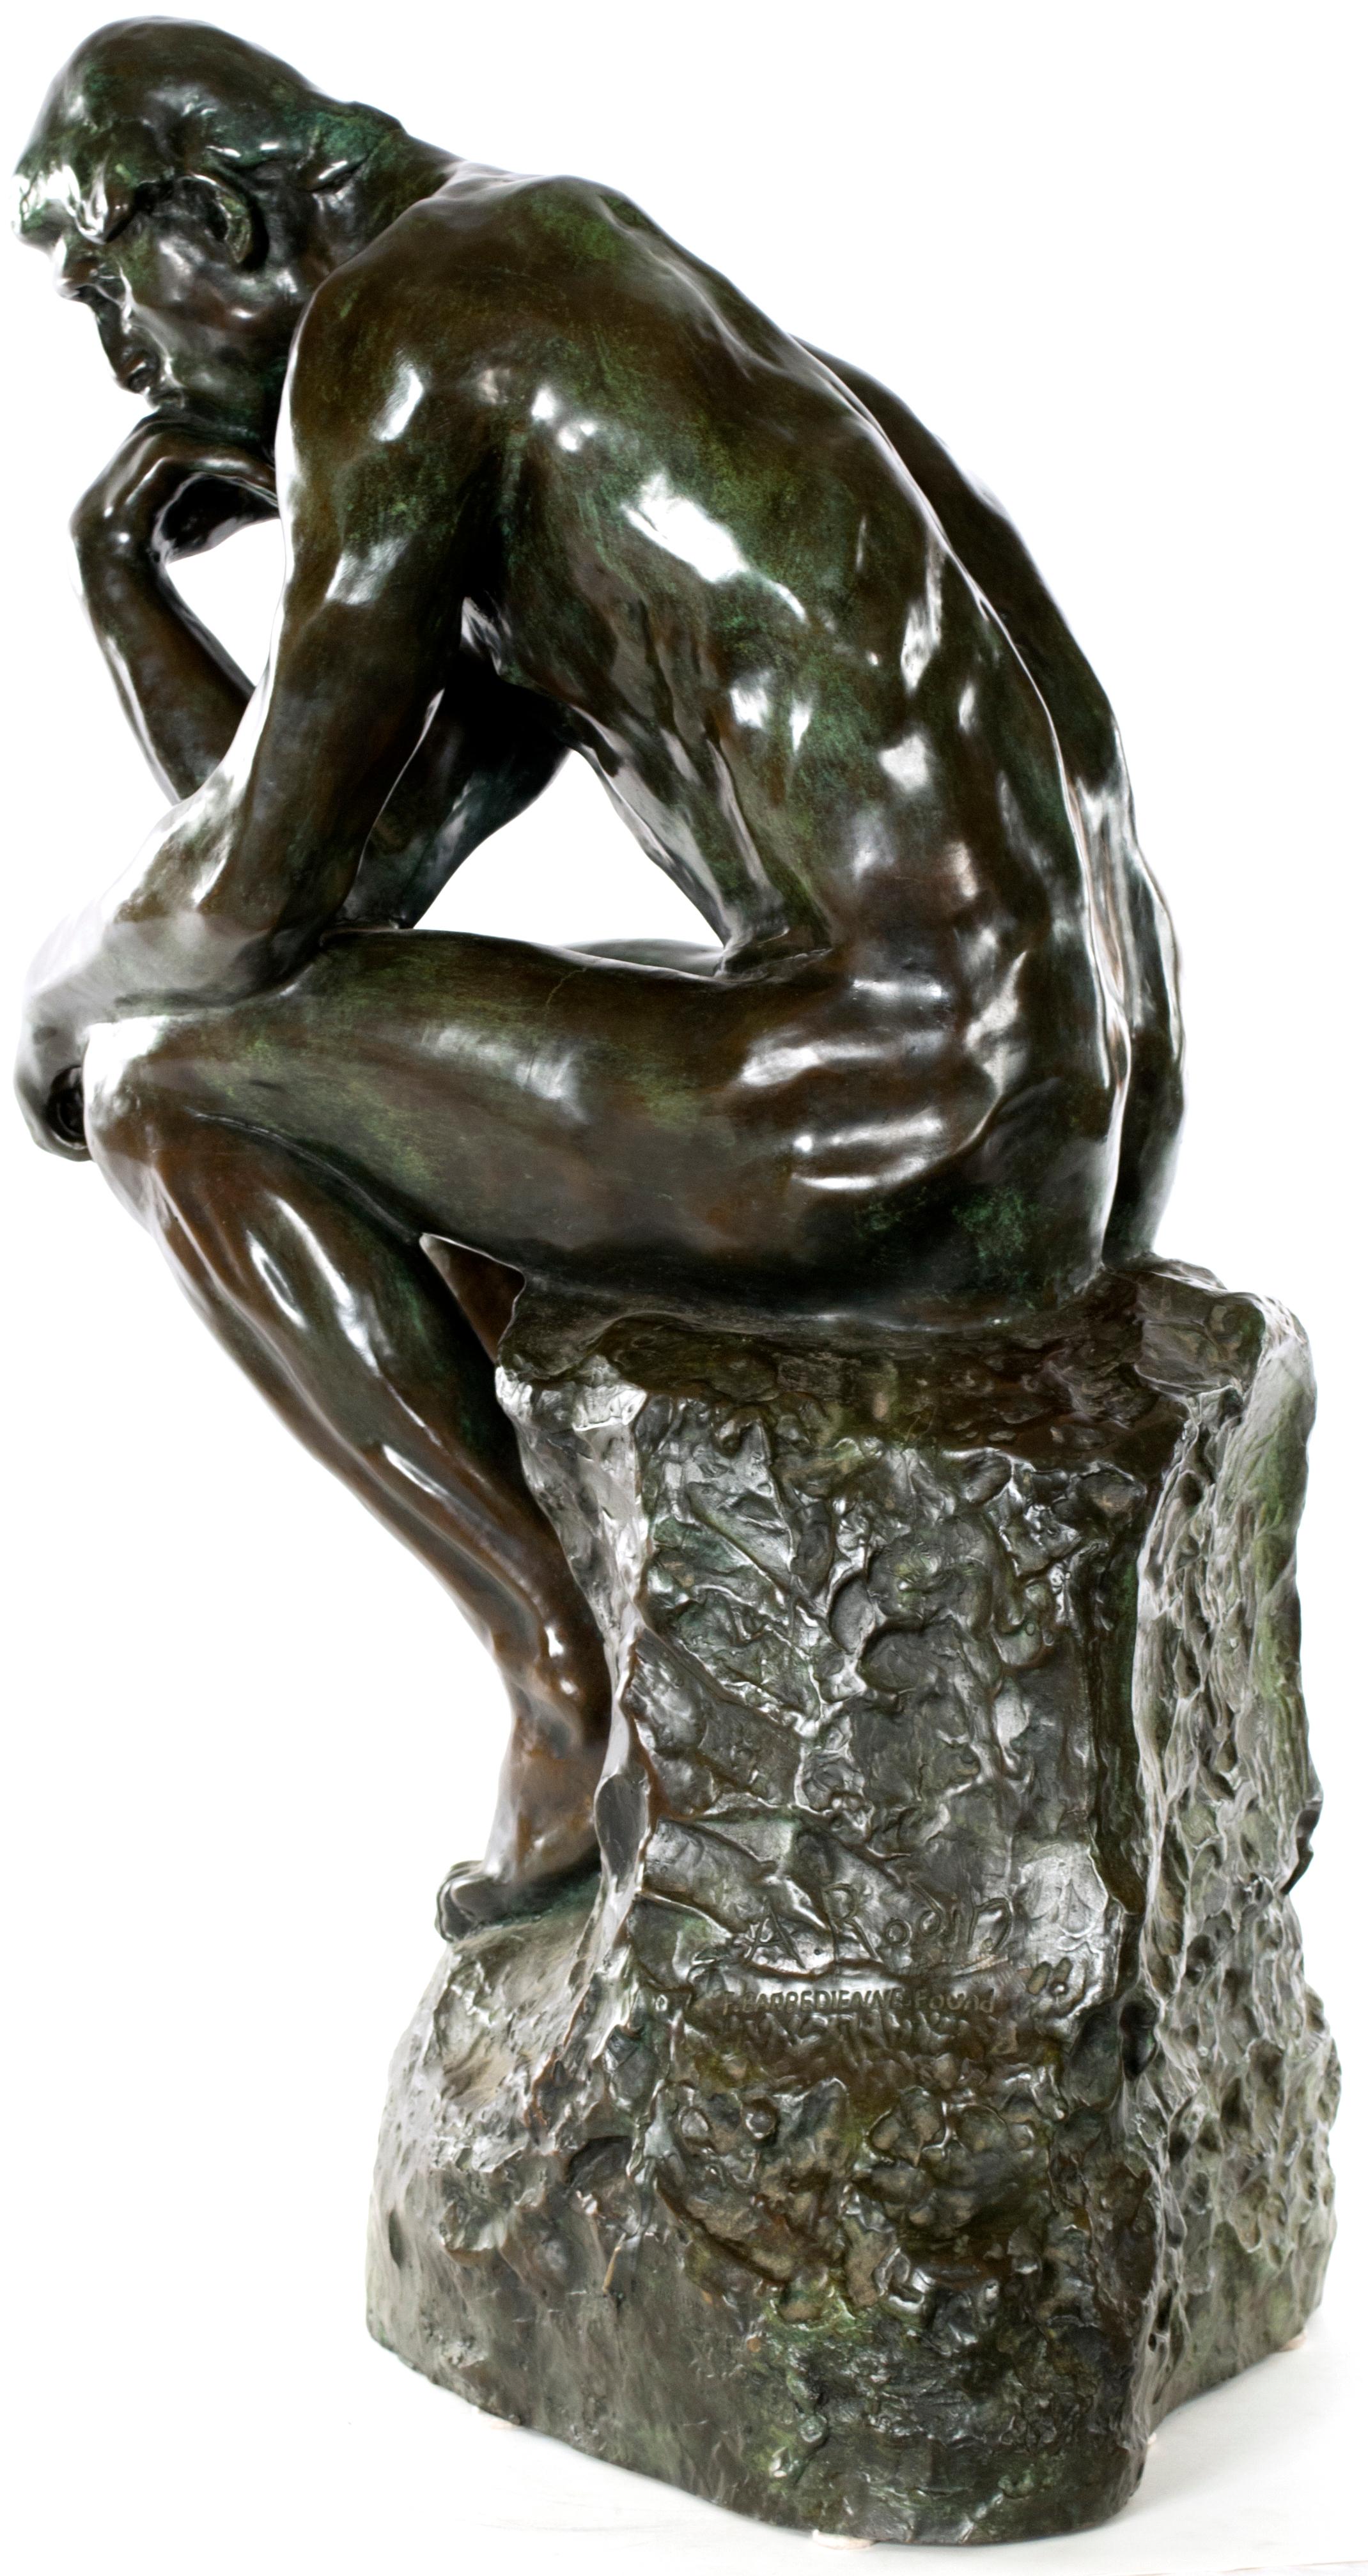 The thinker by Auguste Rodin (French, 1840 - 1917) is among the most recognized and admired works of art in the world. The work was conceived by the artist as part of his monumental work 